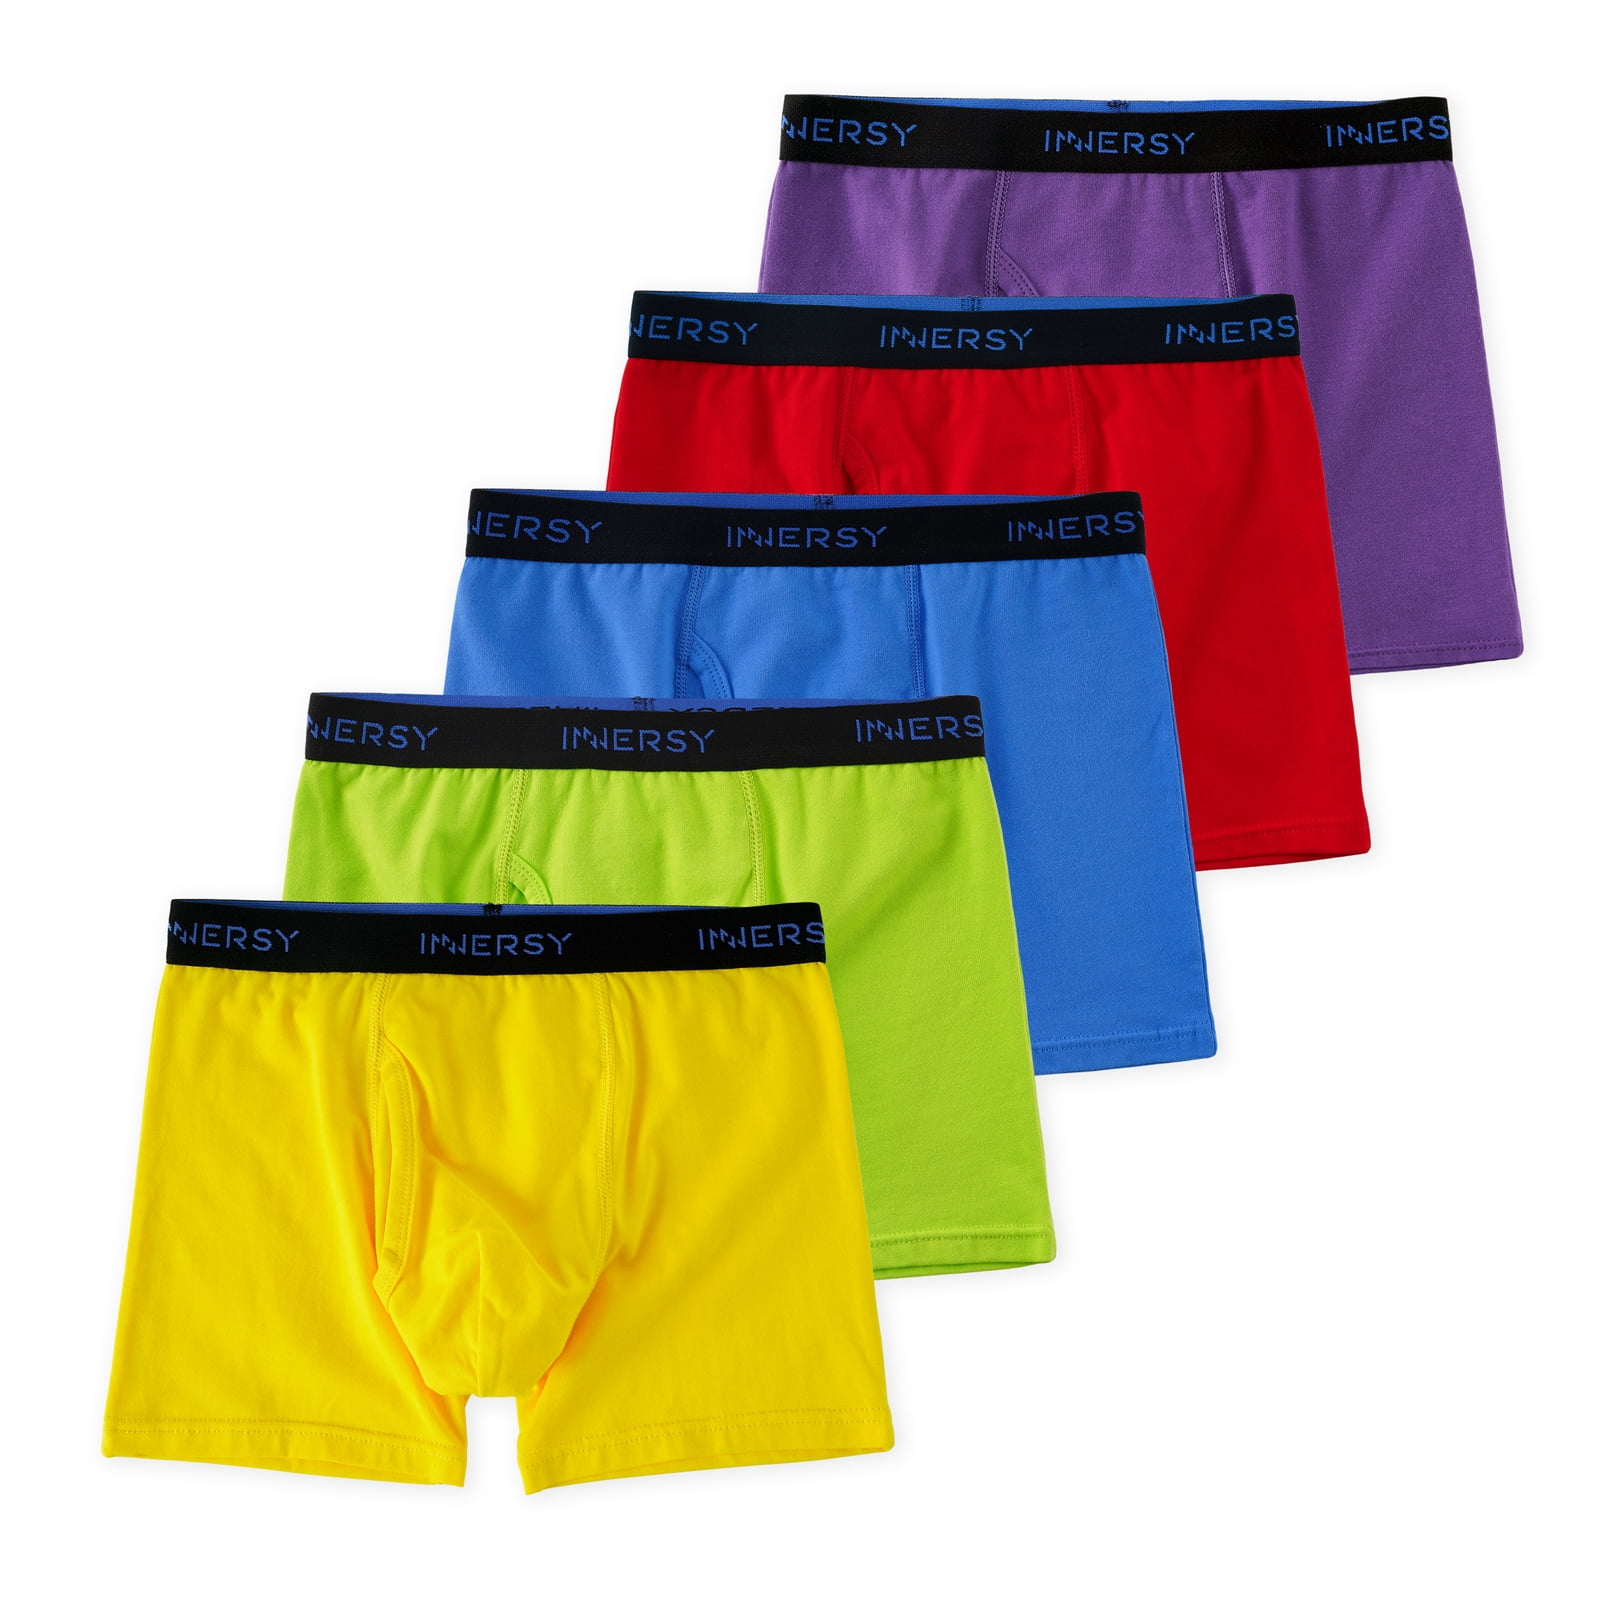 INNERSY Boys Underwear Stretchy Cotton Soft Boxer Briefs for 6-18